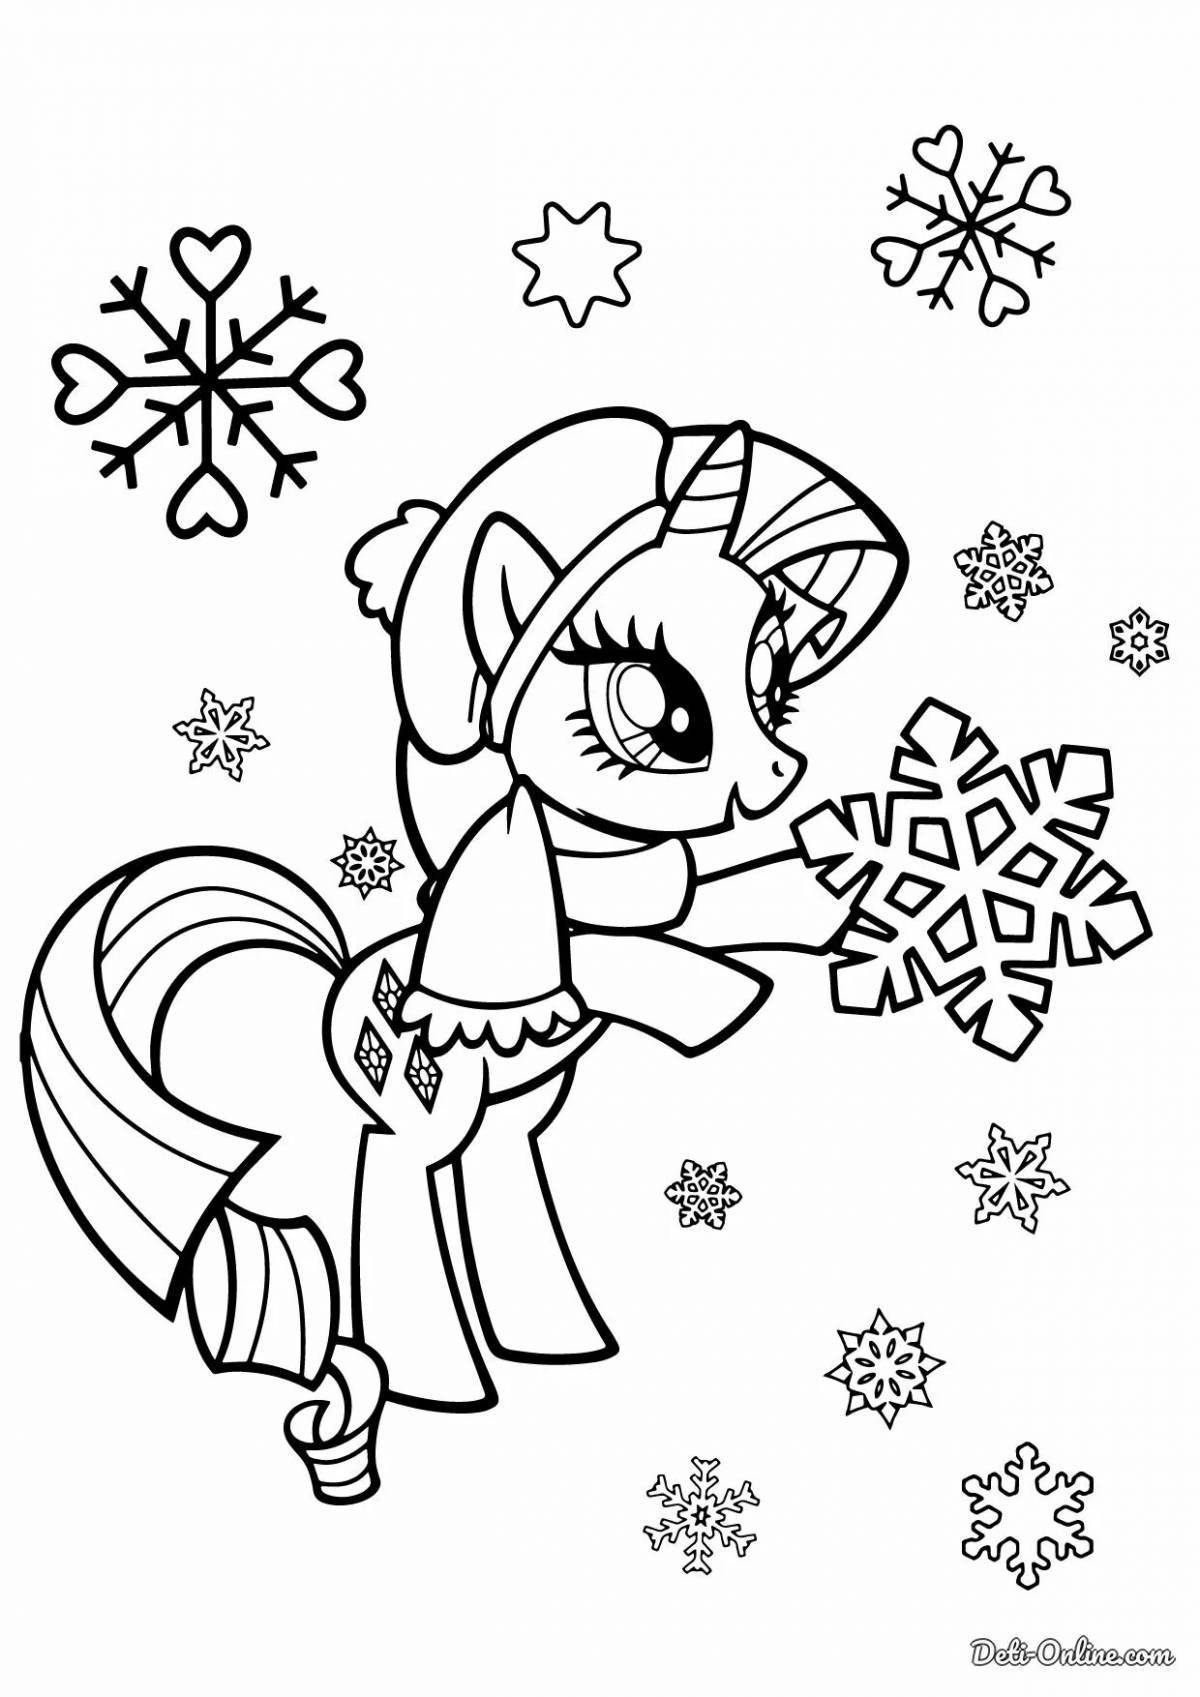 Fine Christmas pony coloring page